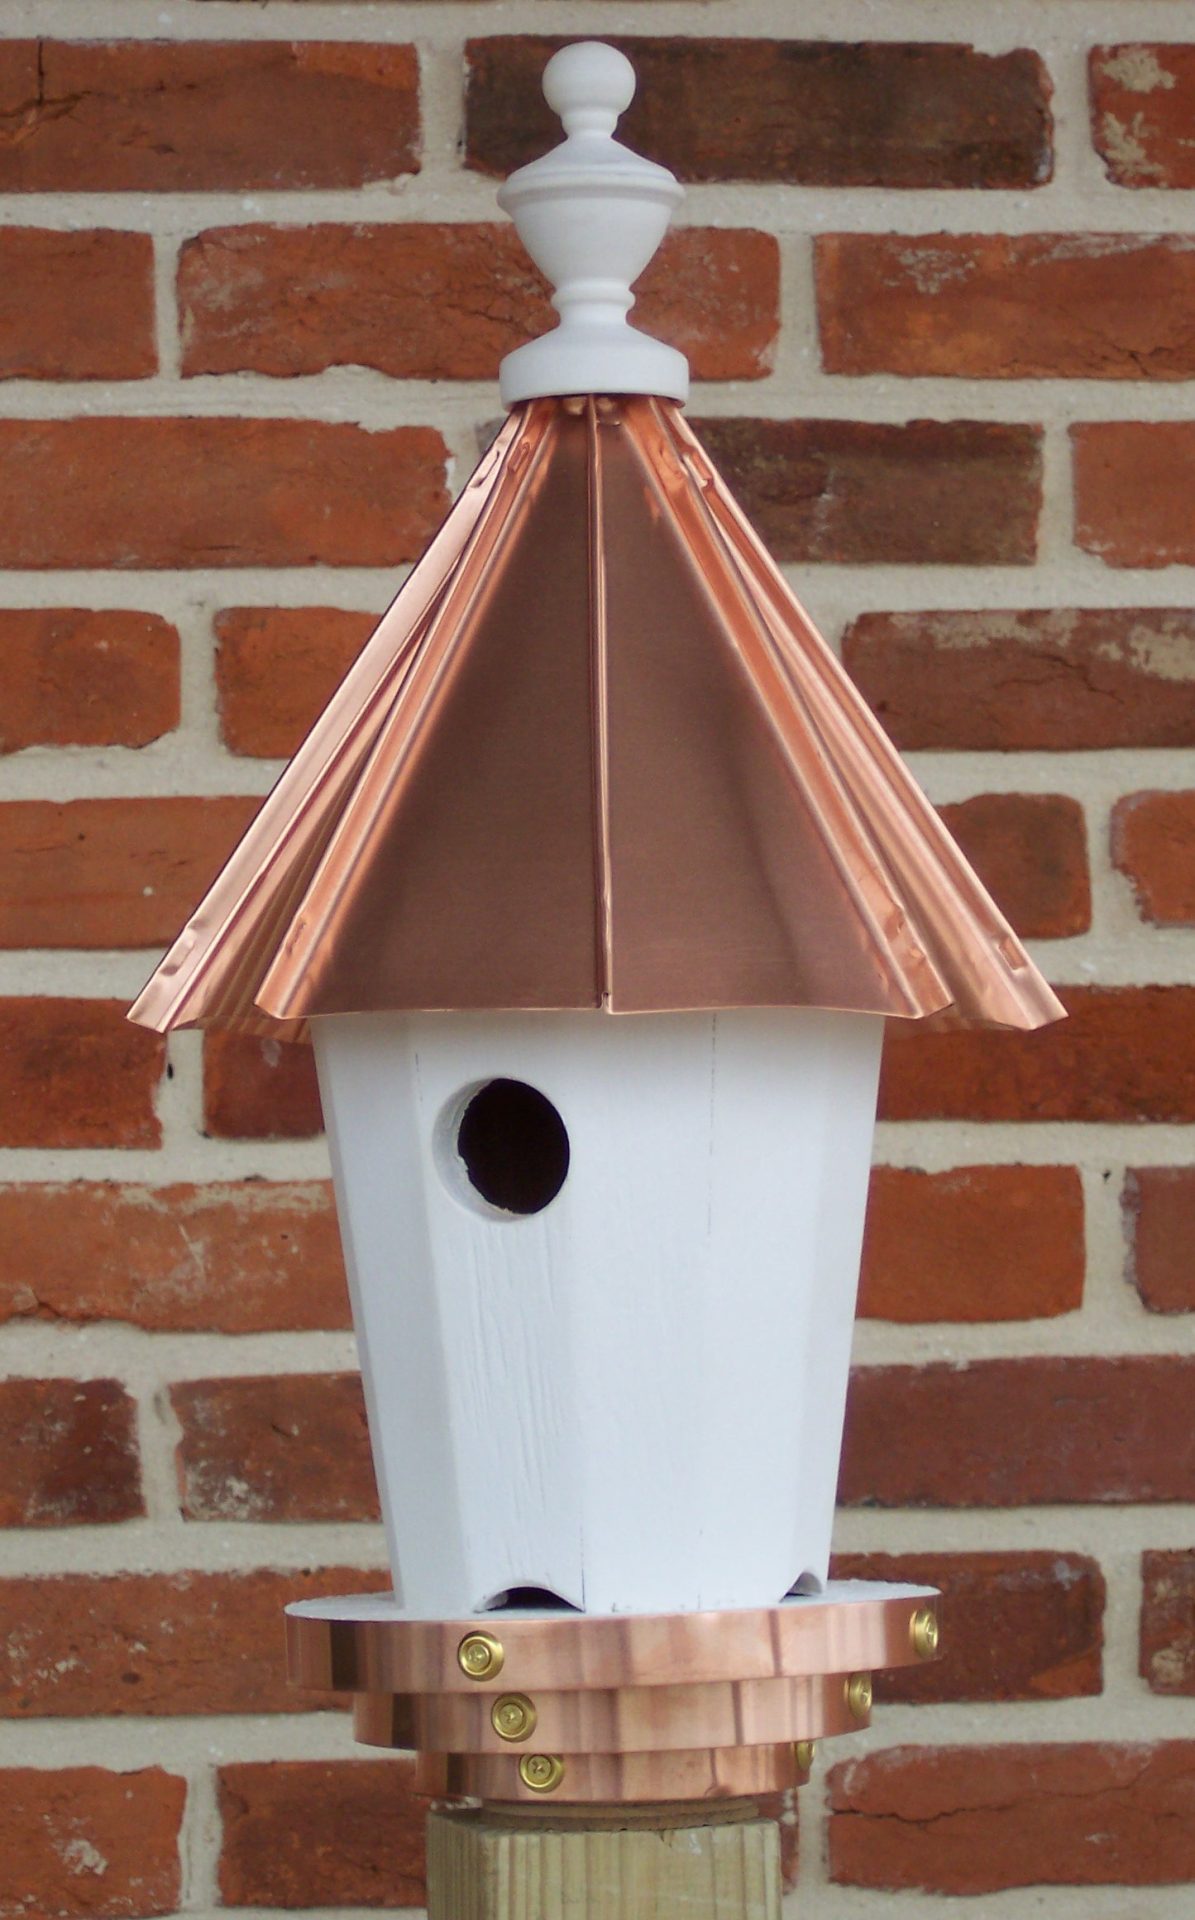 Single Hole Bird House with Polished Copper Roof - 20 inches Tall